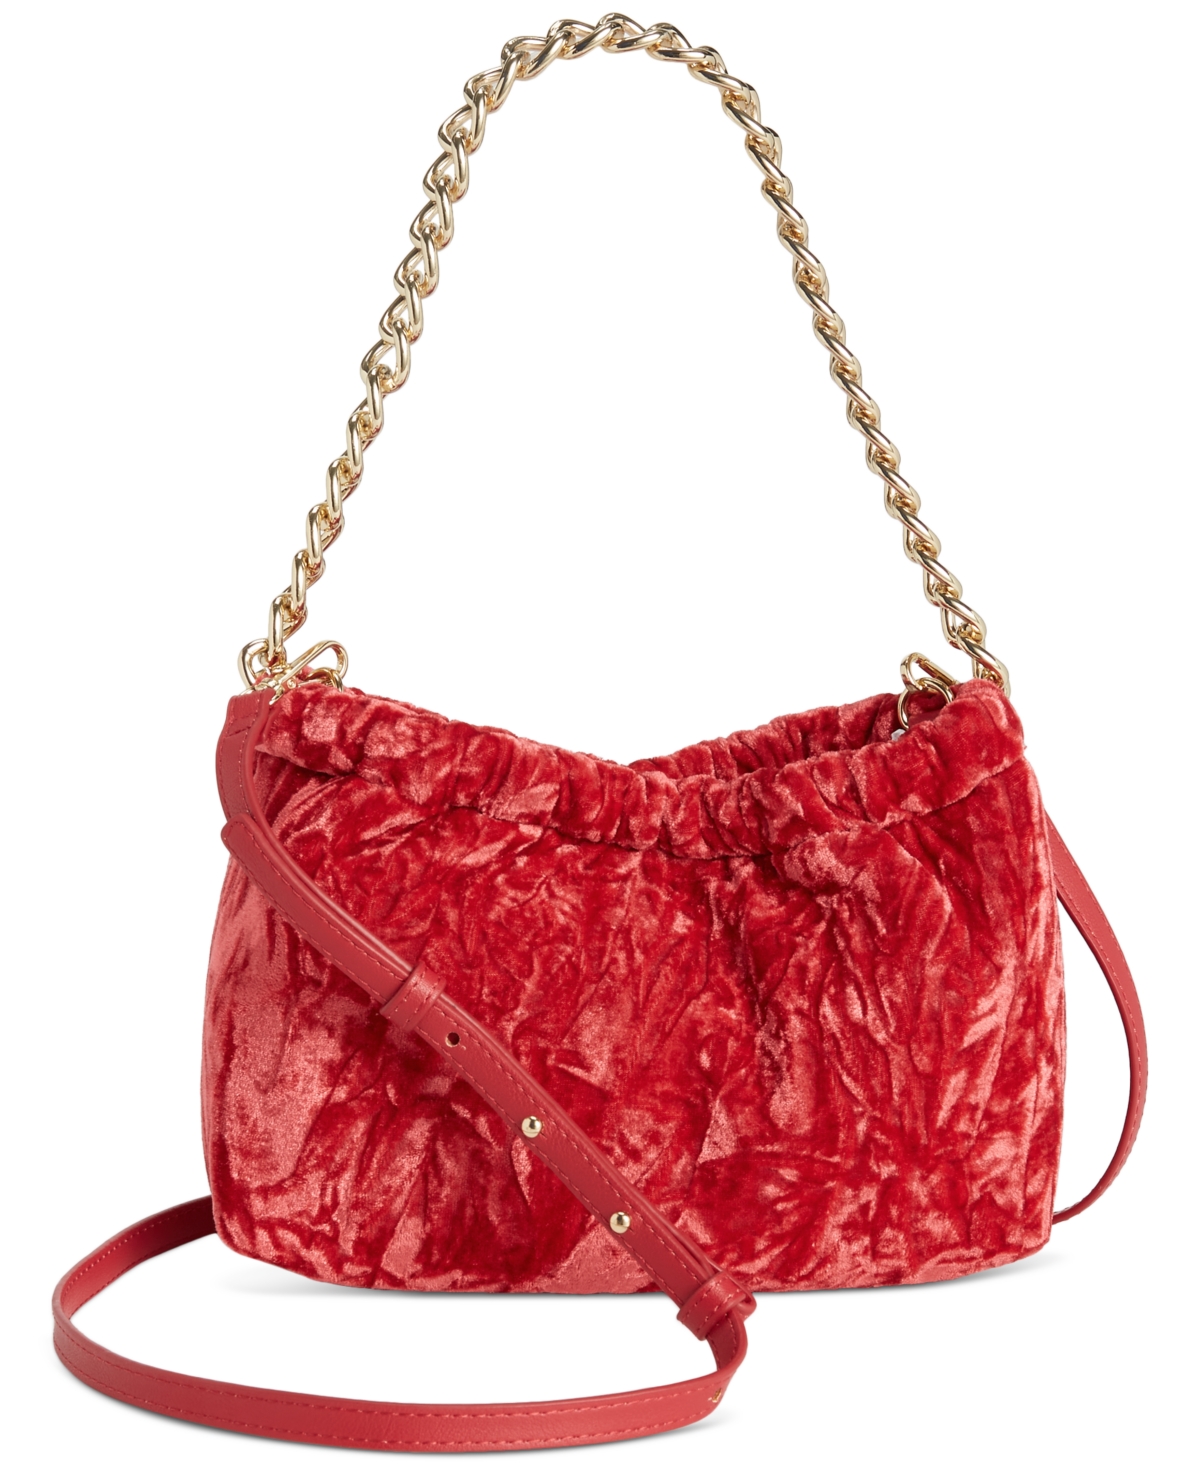 Inc International Concepts Rennata Quilted Clutch Crossbody, Crested For Macy's In Red Pepper Vlvt